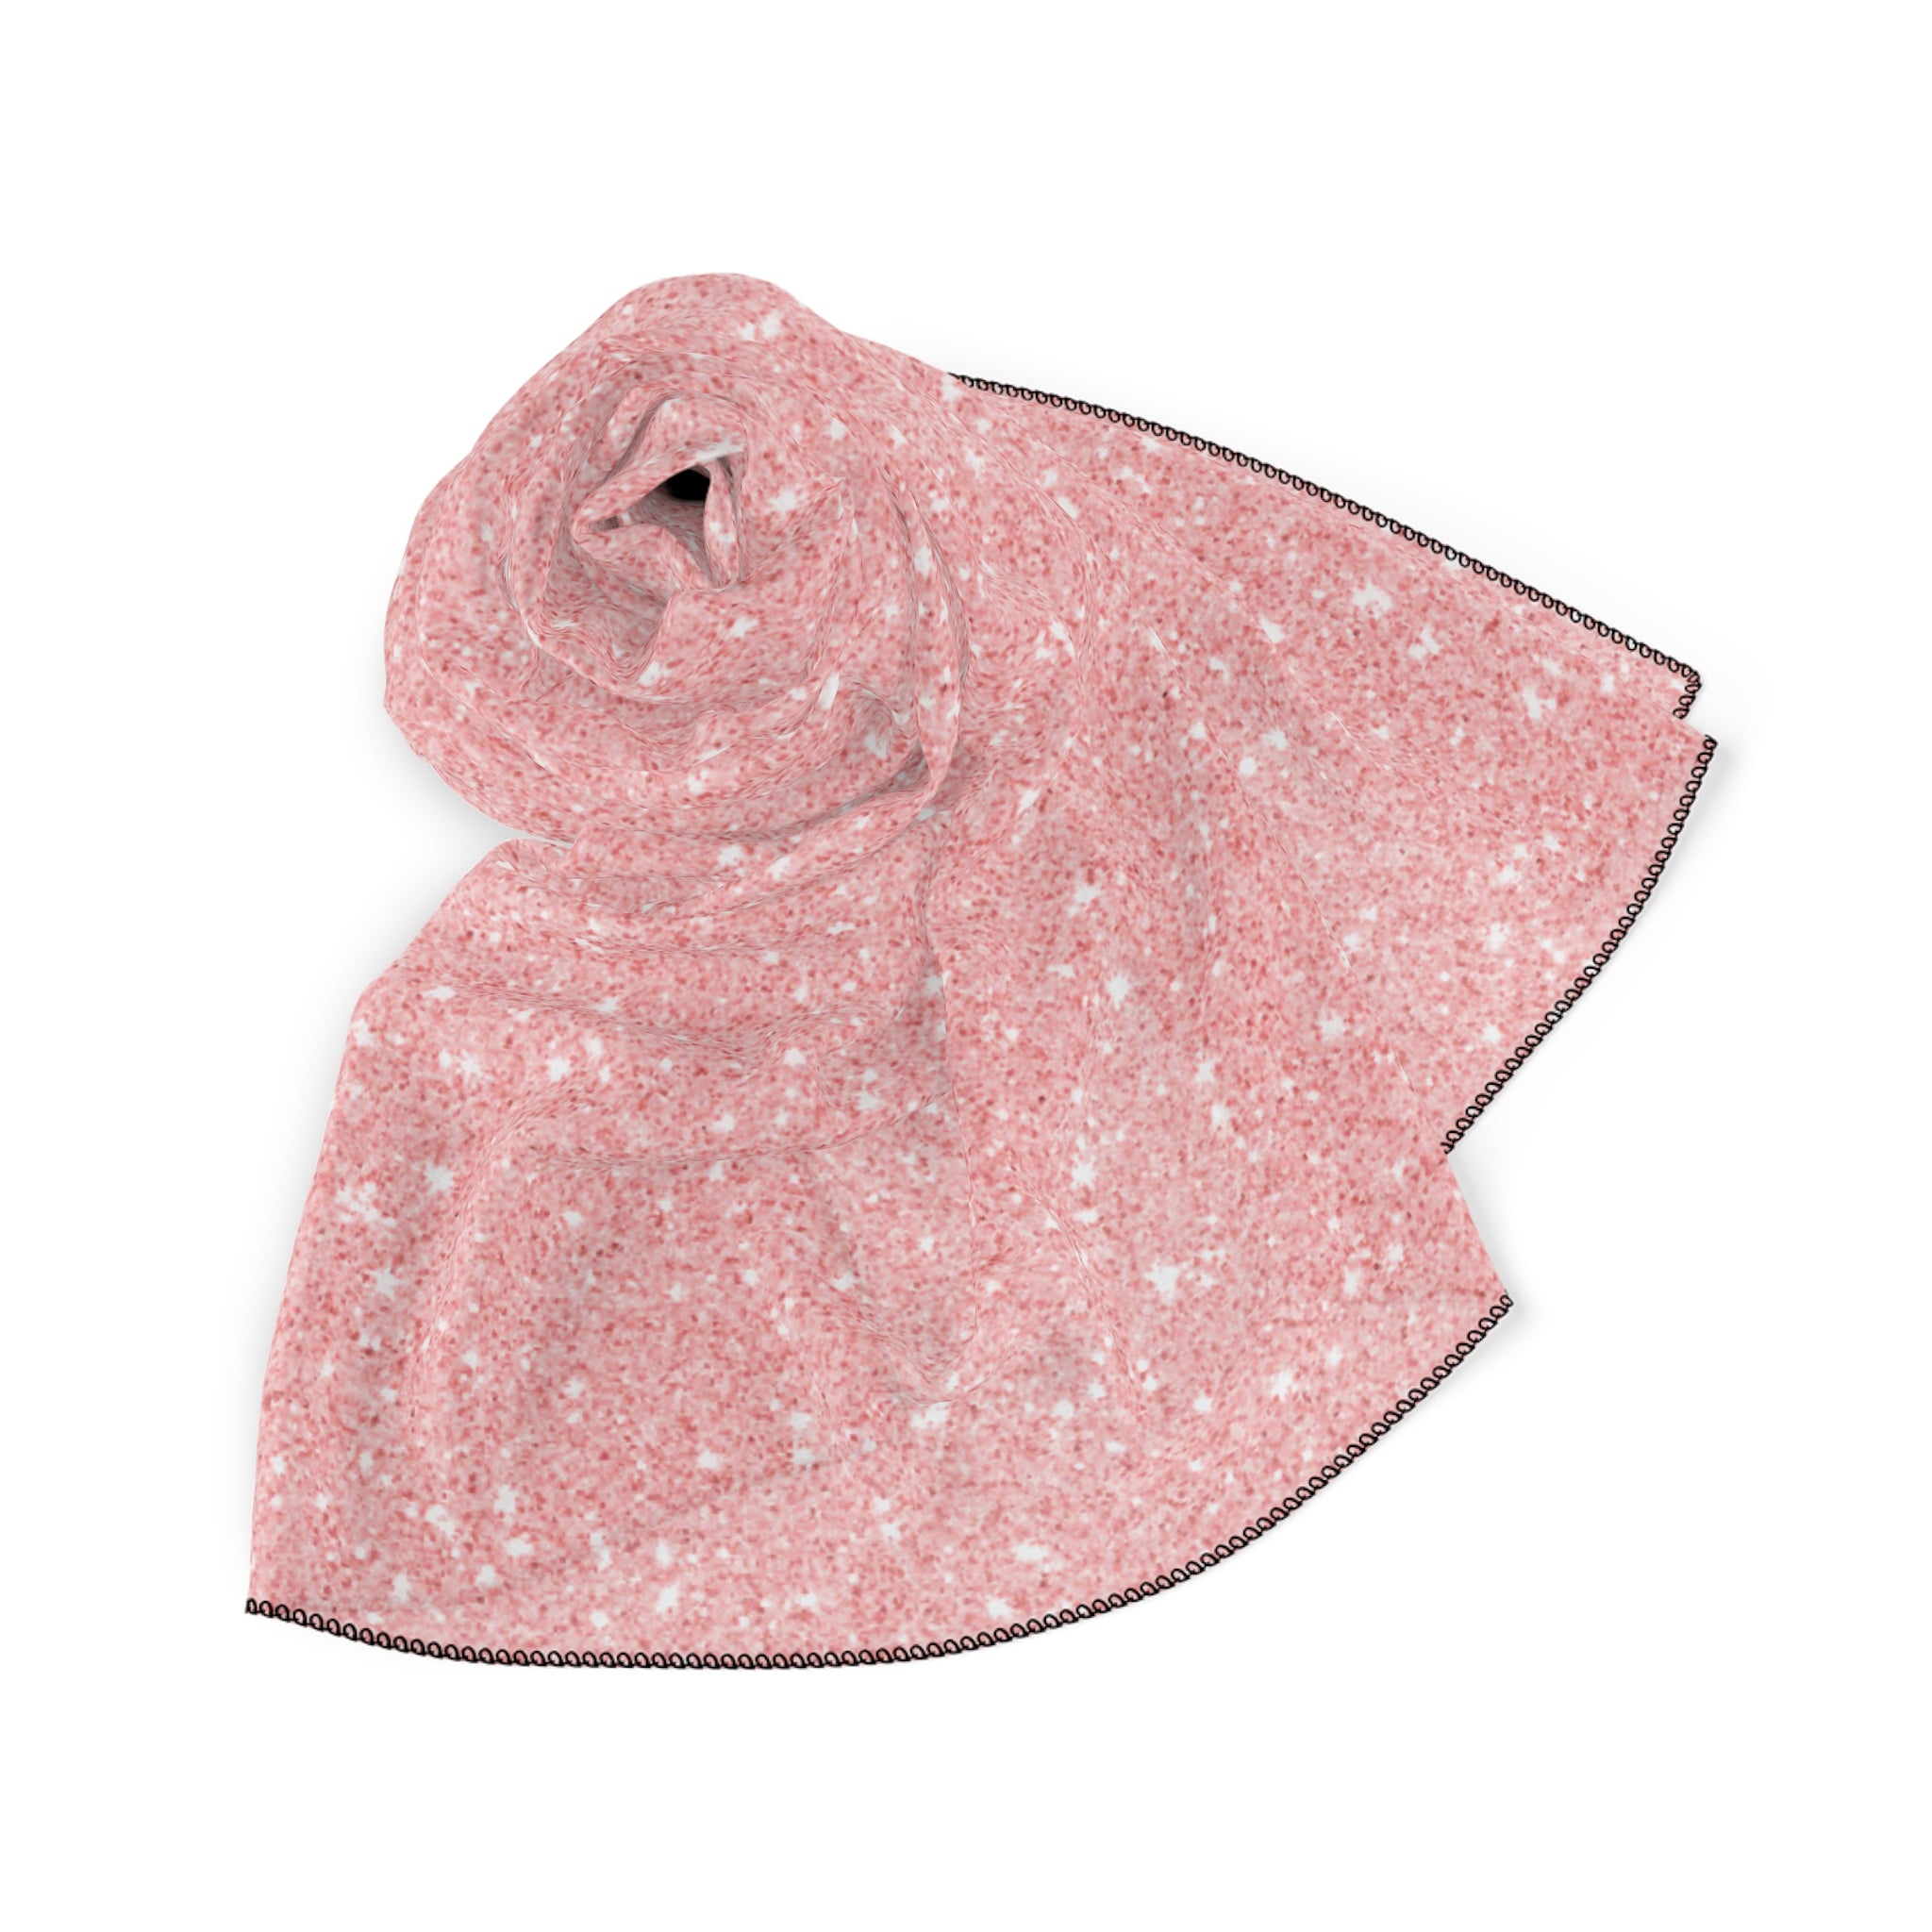 ALMOST PINK POLY SCARF - UGO ROMANO URPYS002